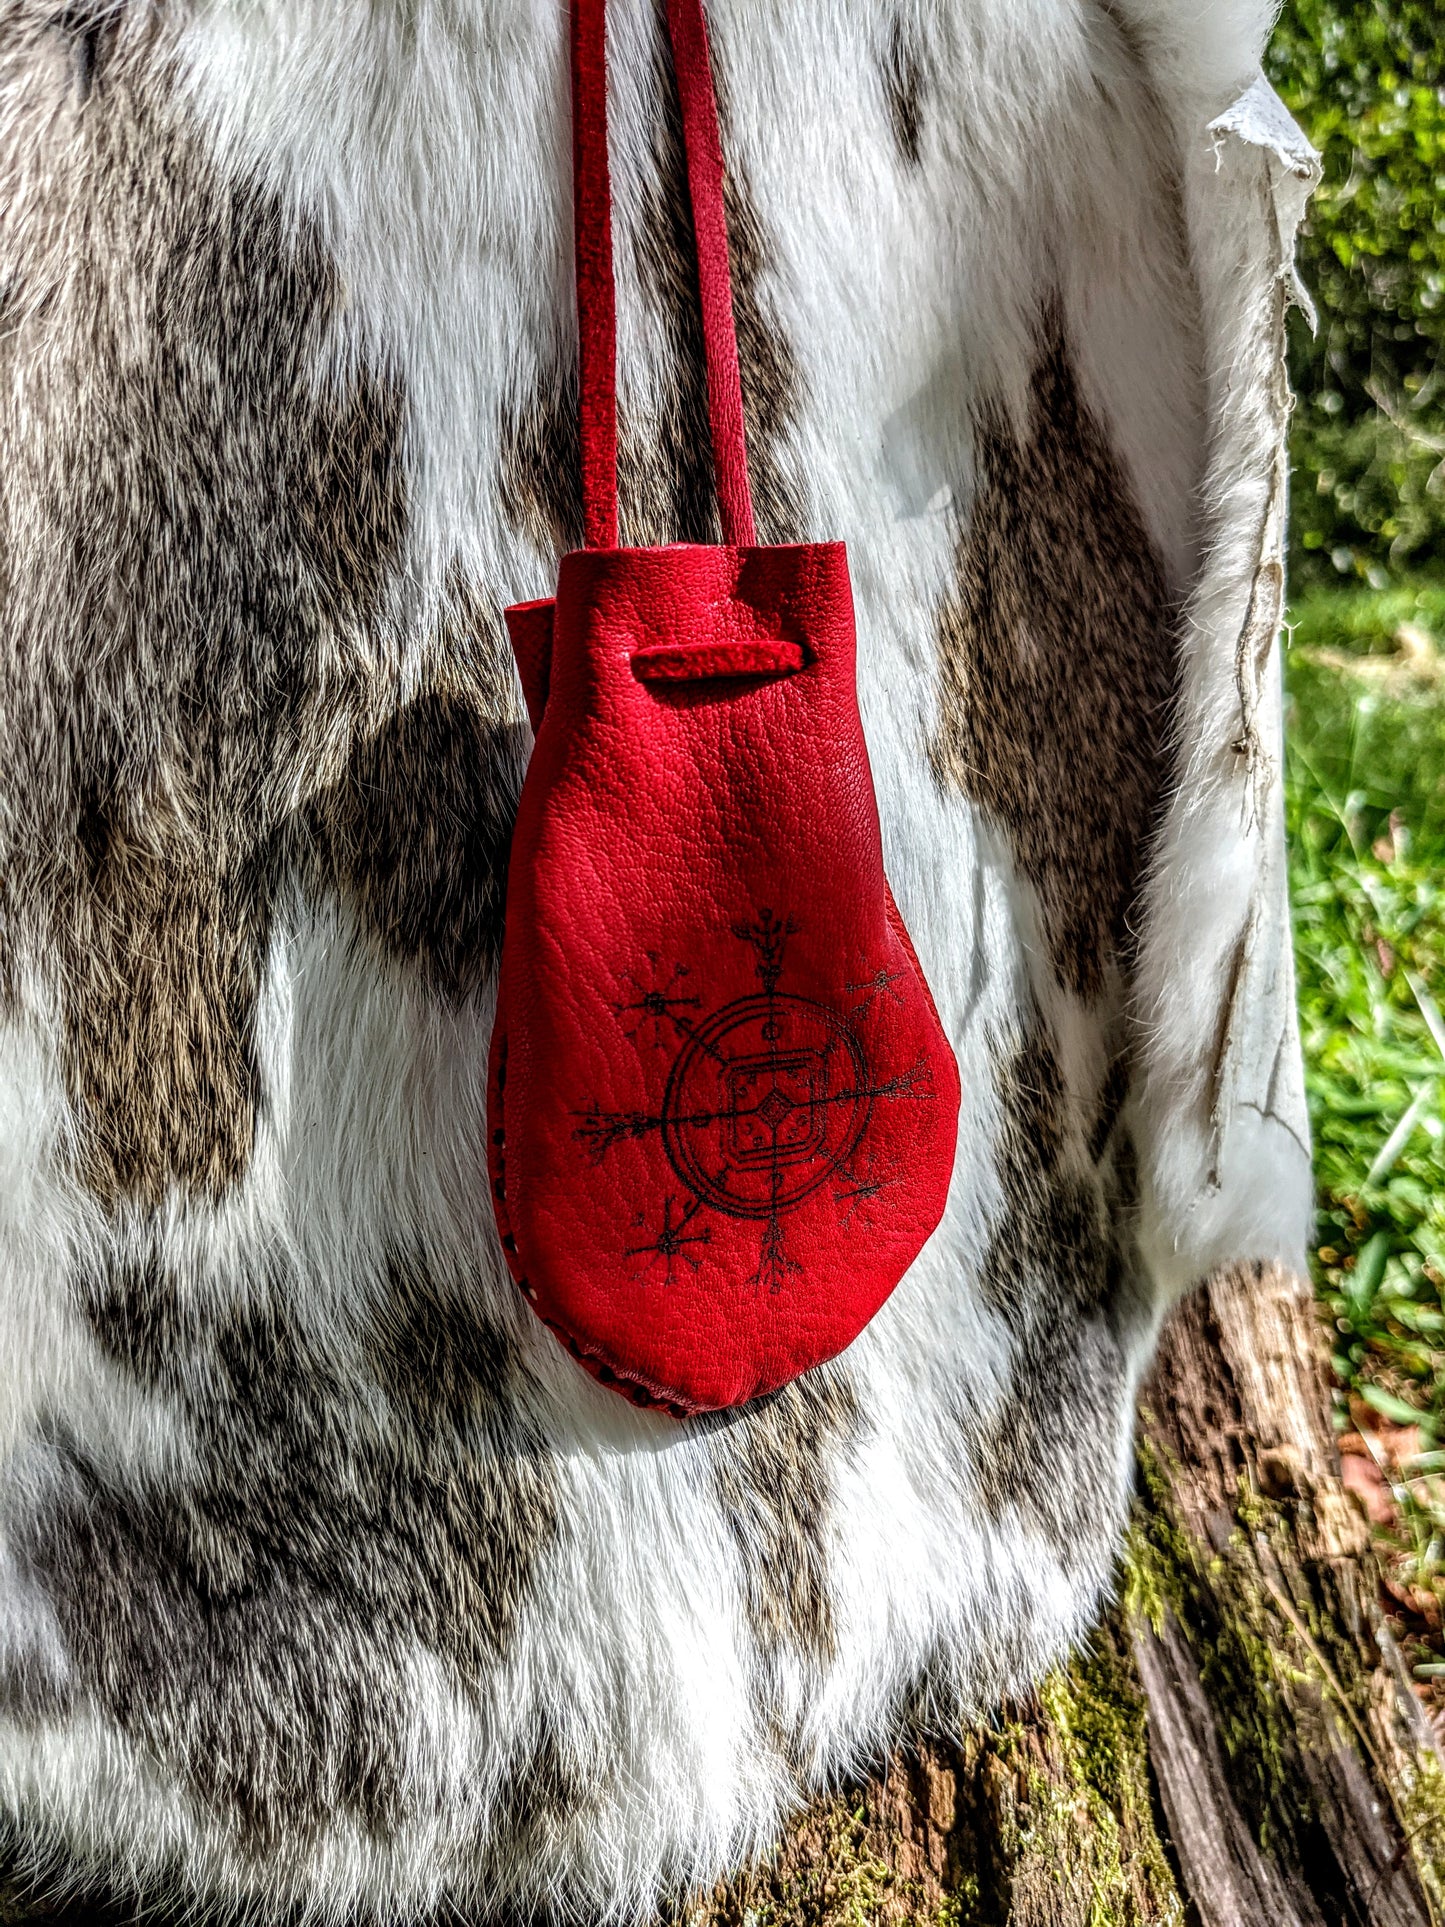 Red Hulinhjalmur (“Helm Of Disguise”)  Stave Buckskin Leather 2x3 Medicine Bag Neck Pouch Rune Norse Pagan